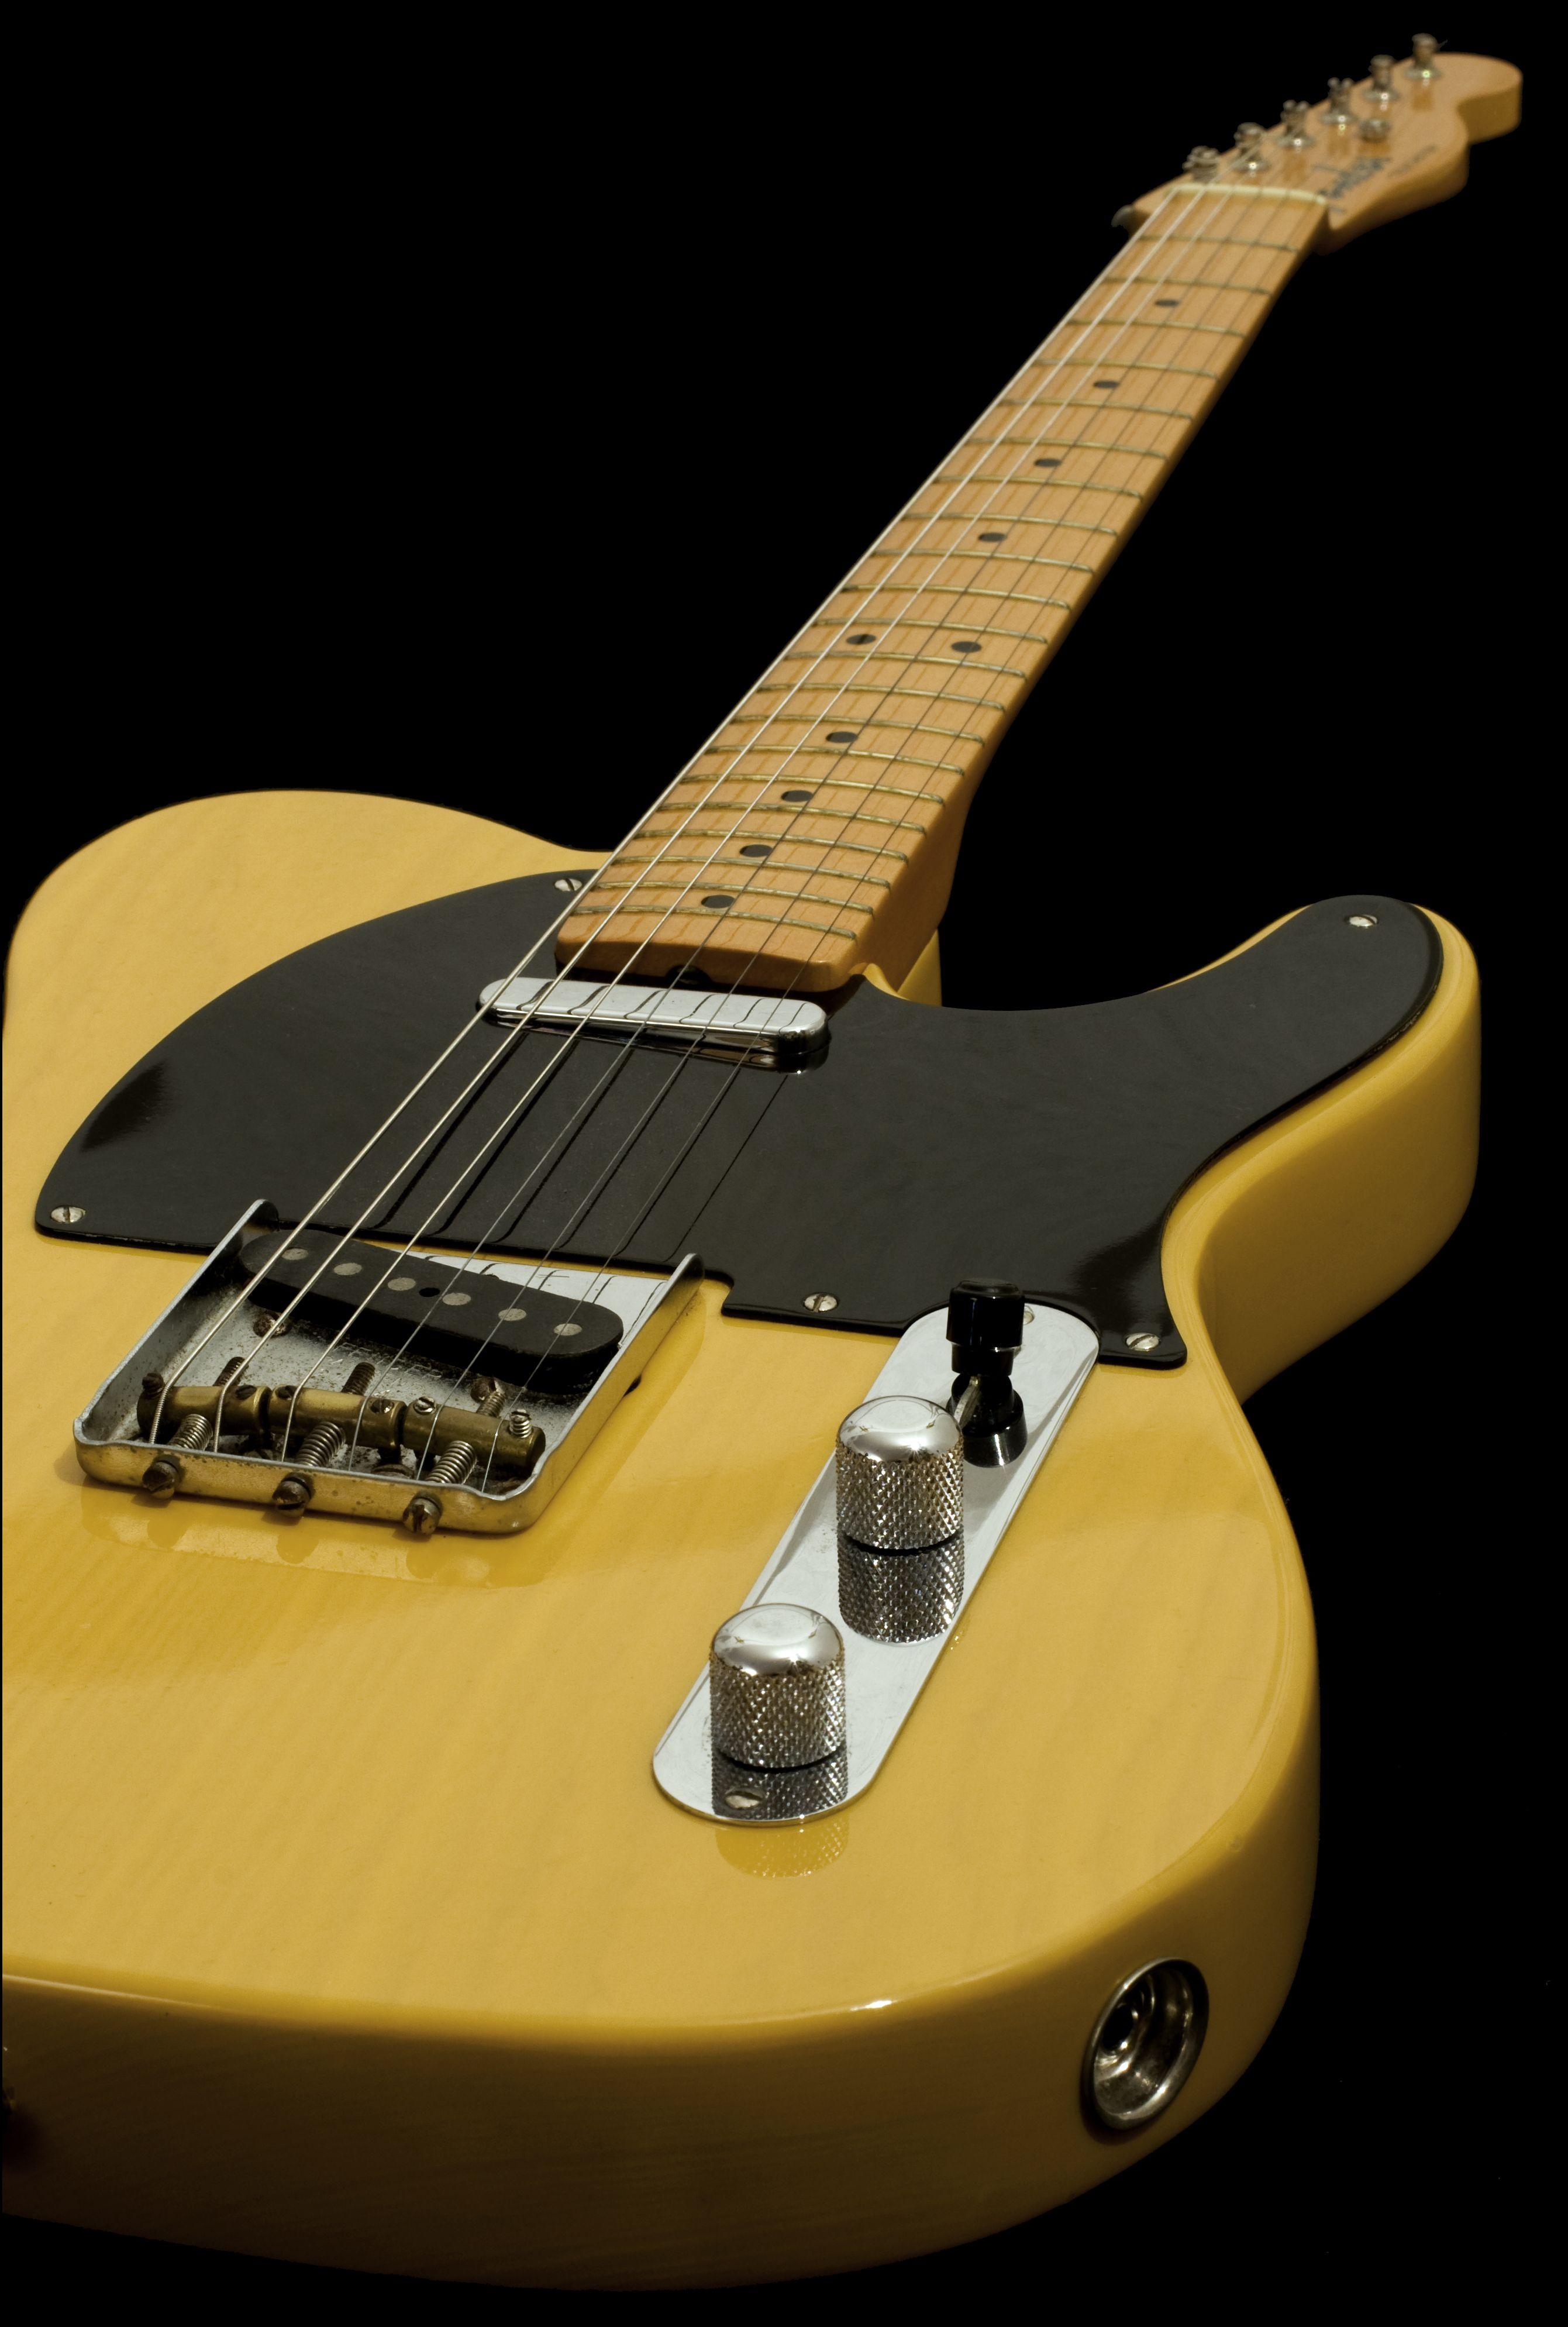 Fender Phone Wallpapers Top Free Fender Phone Backgrounds Wallpaperaccess